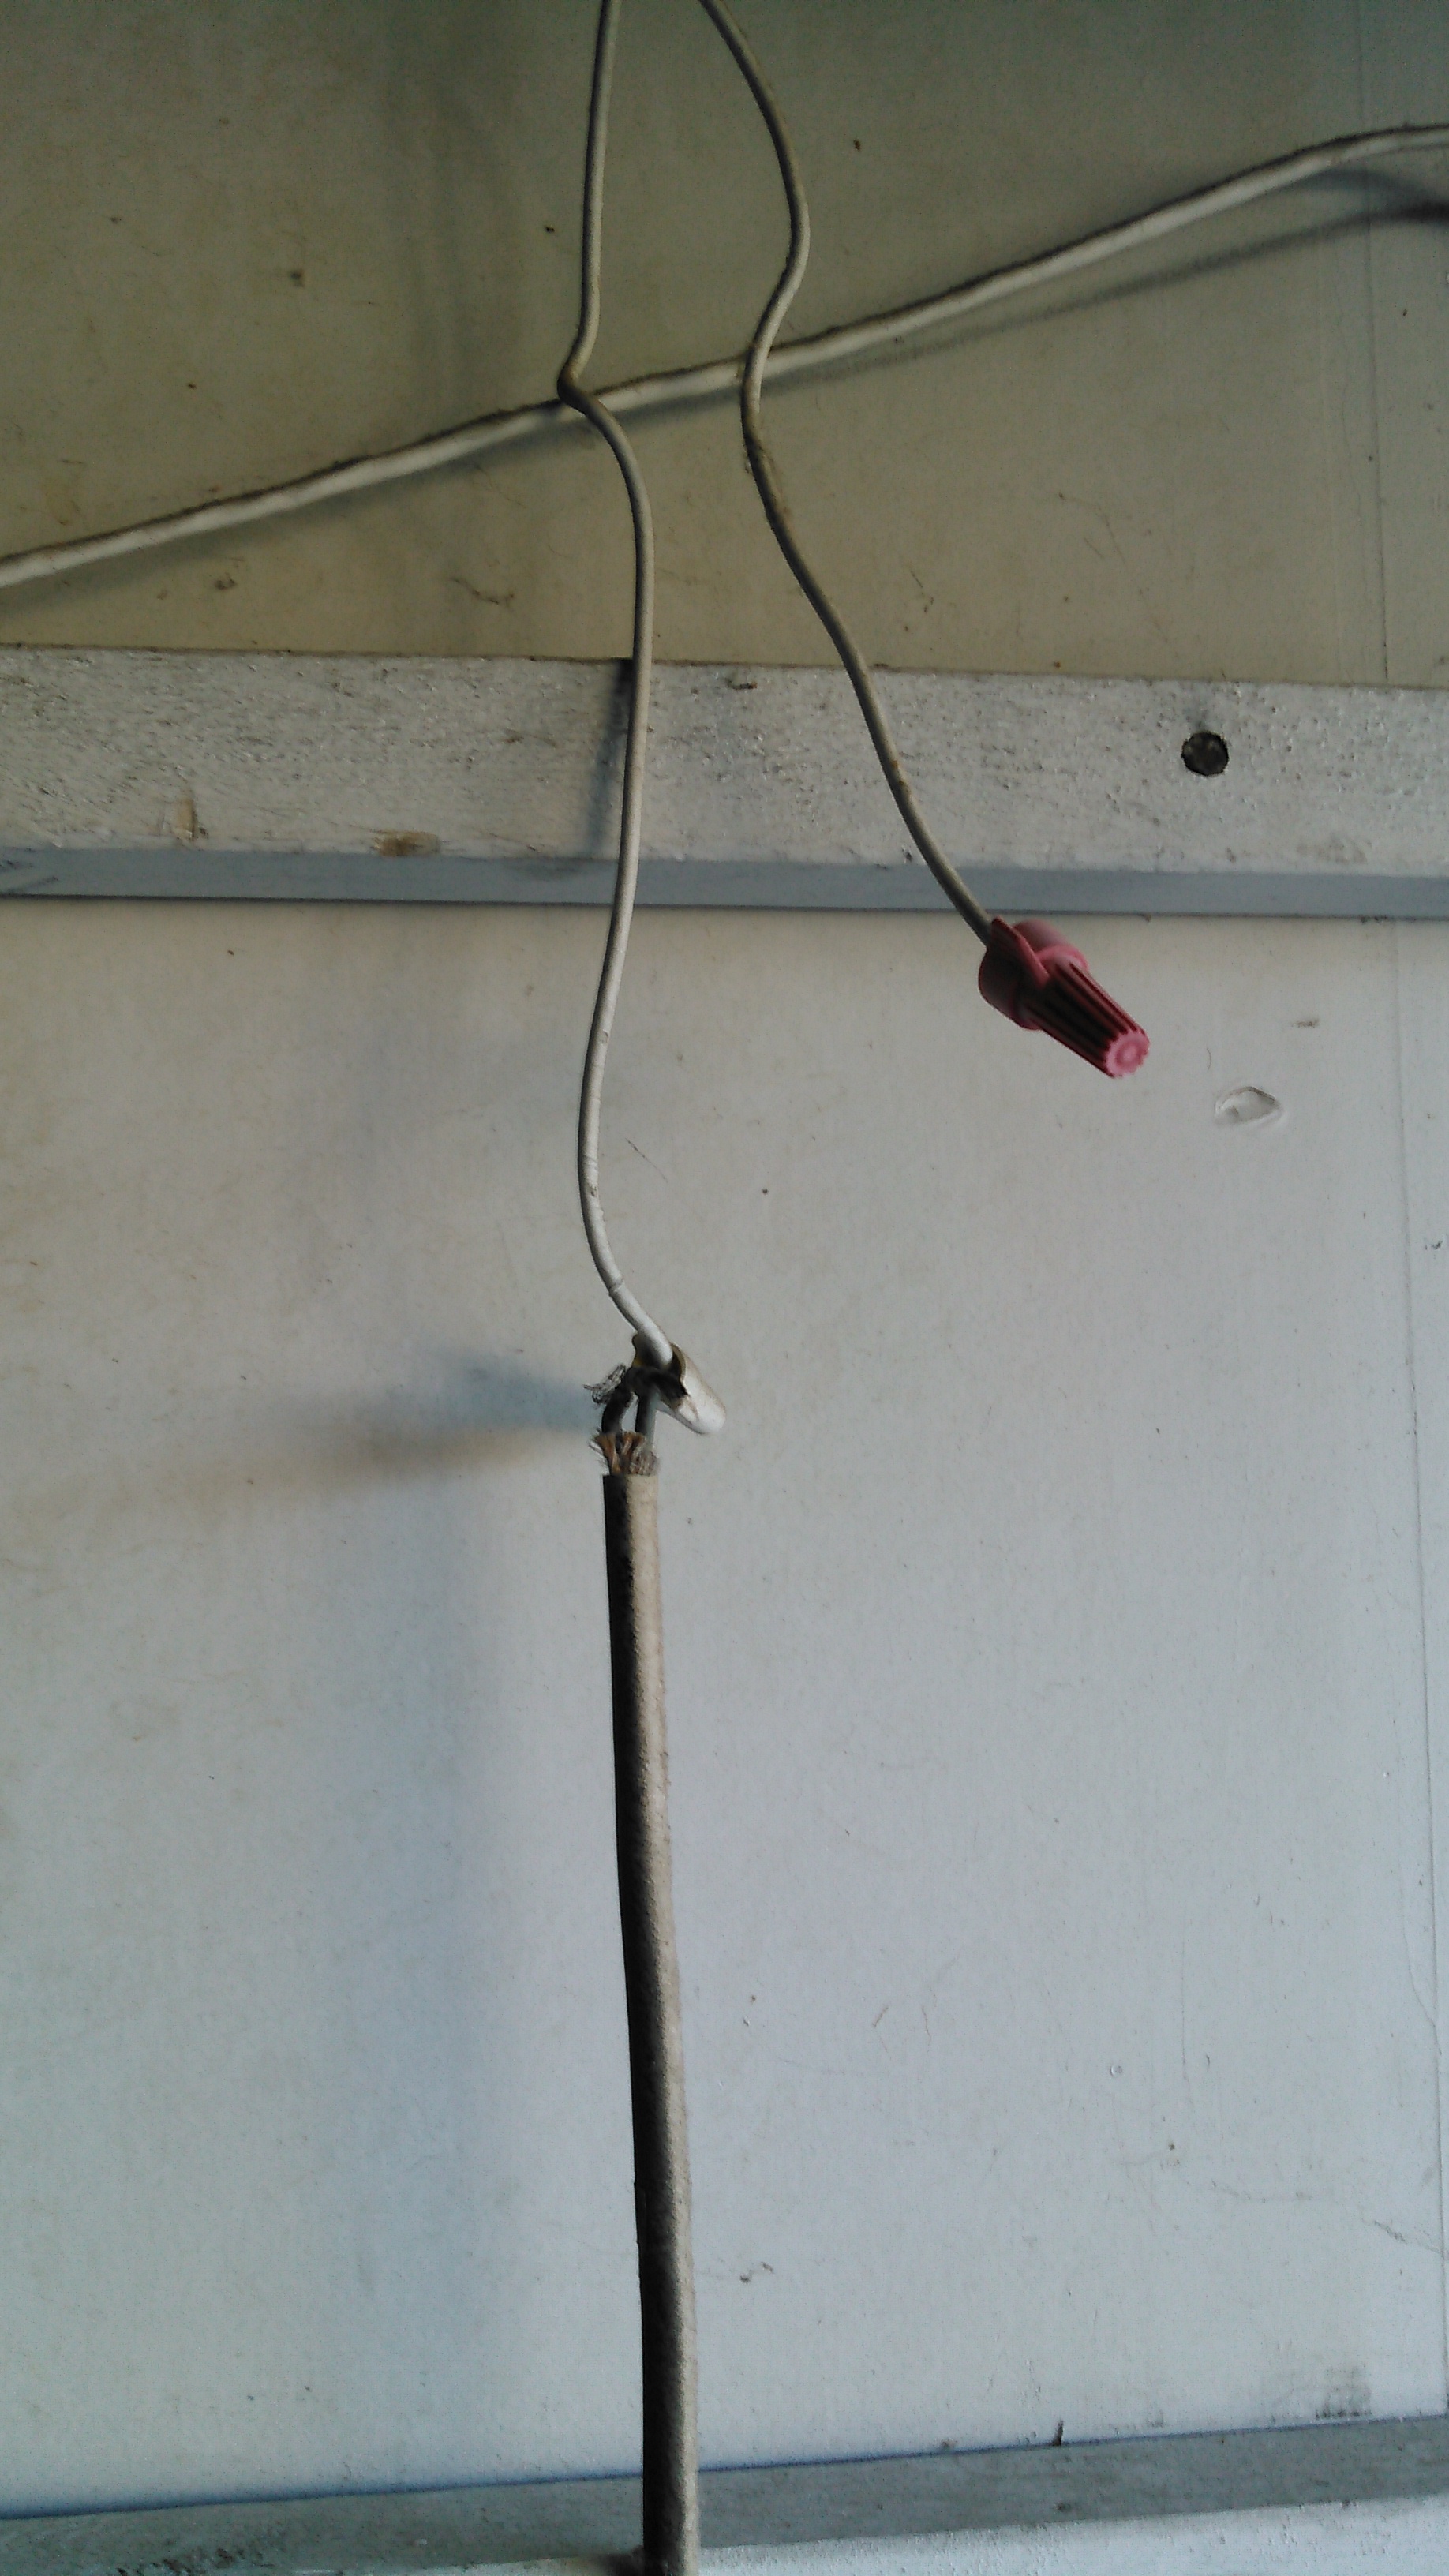 Loose wires in garage